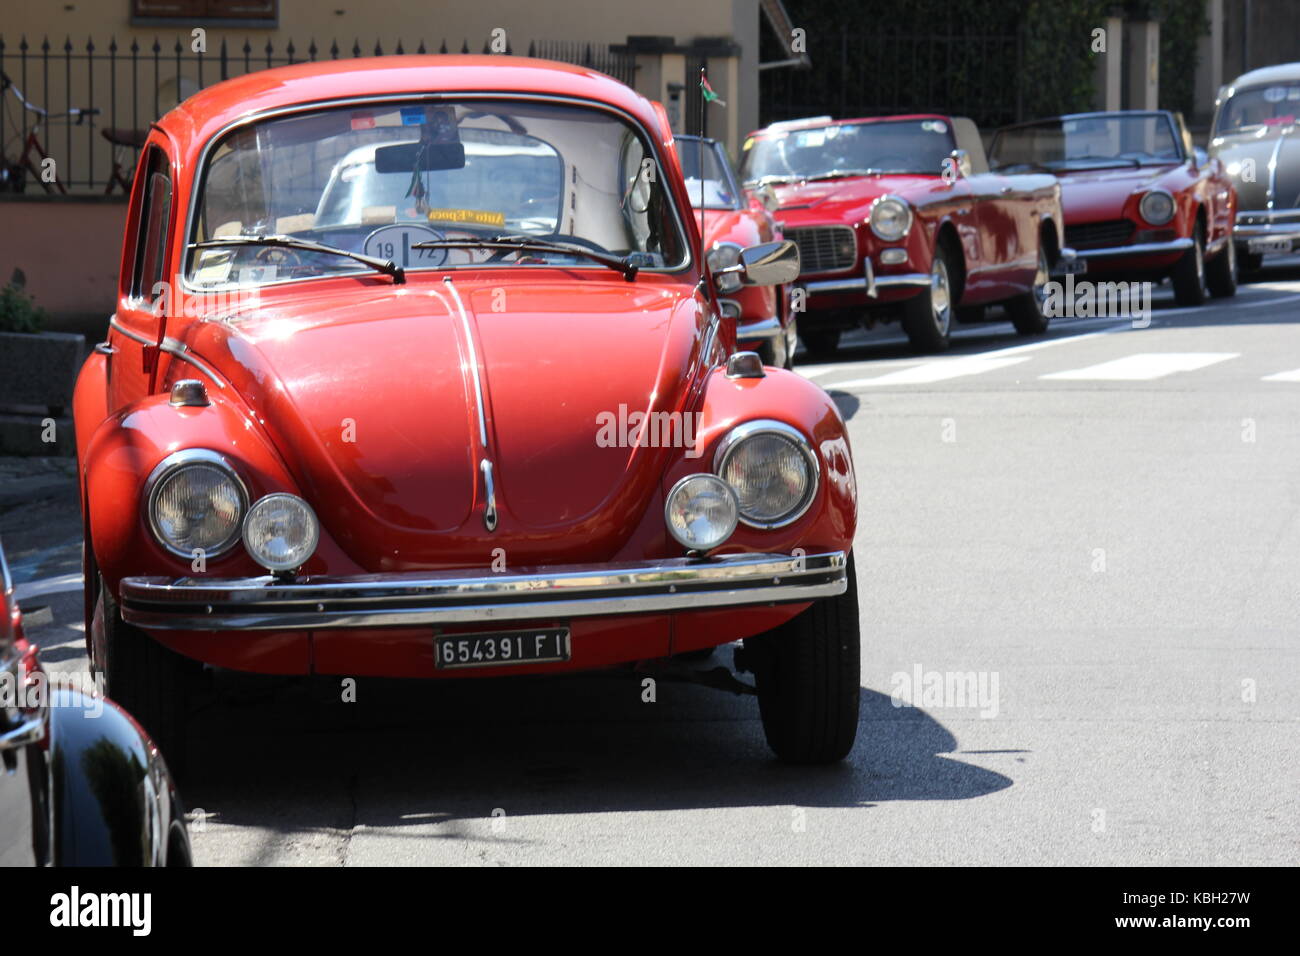 LASTRA A SIGNA, ITALY - AUGUST 30 2015: Vintage red beetle parked on the street in Lastra a Signa, Florence Stock Photo